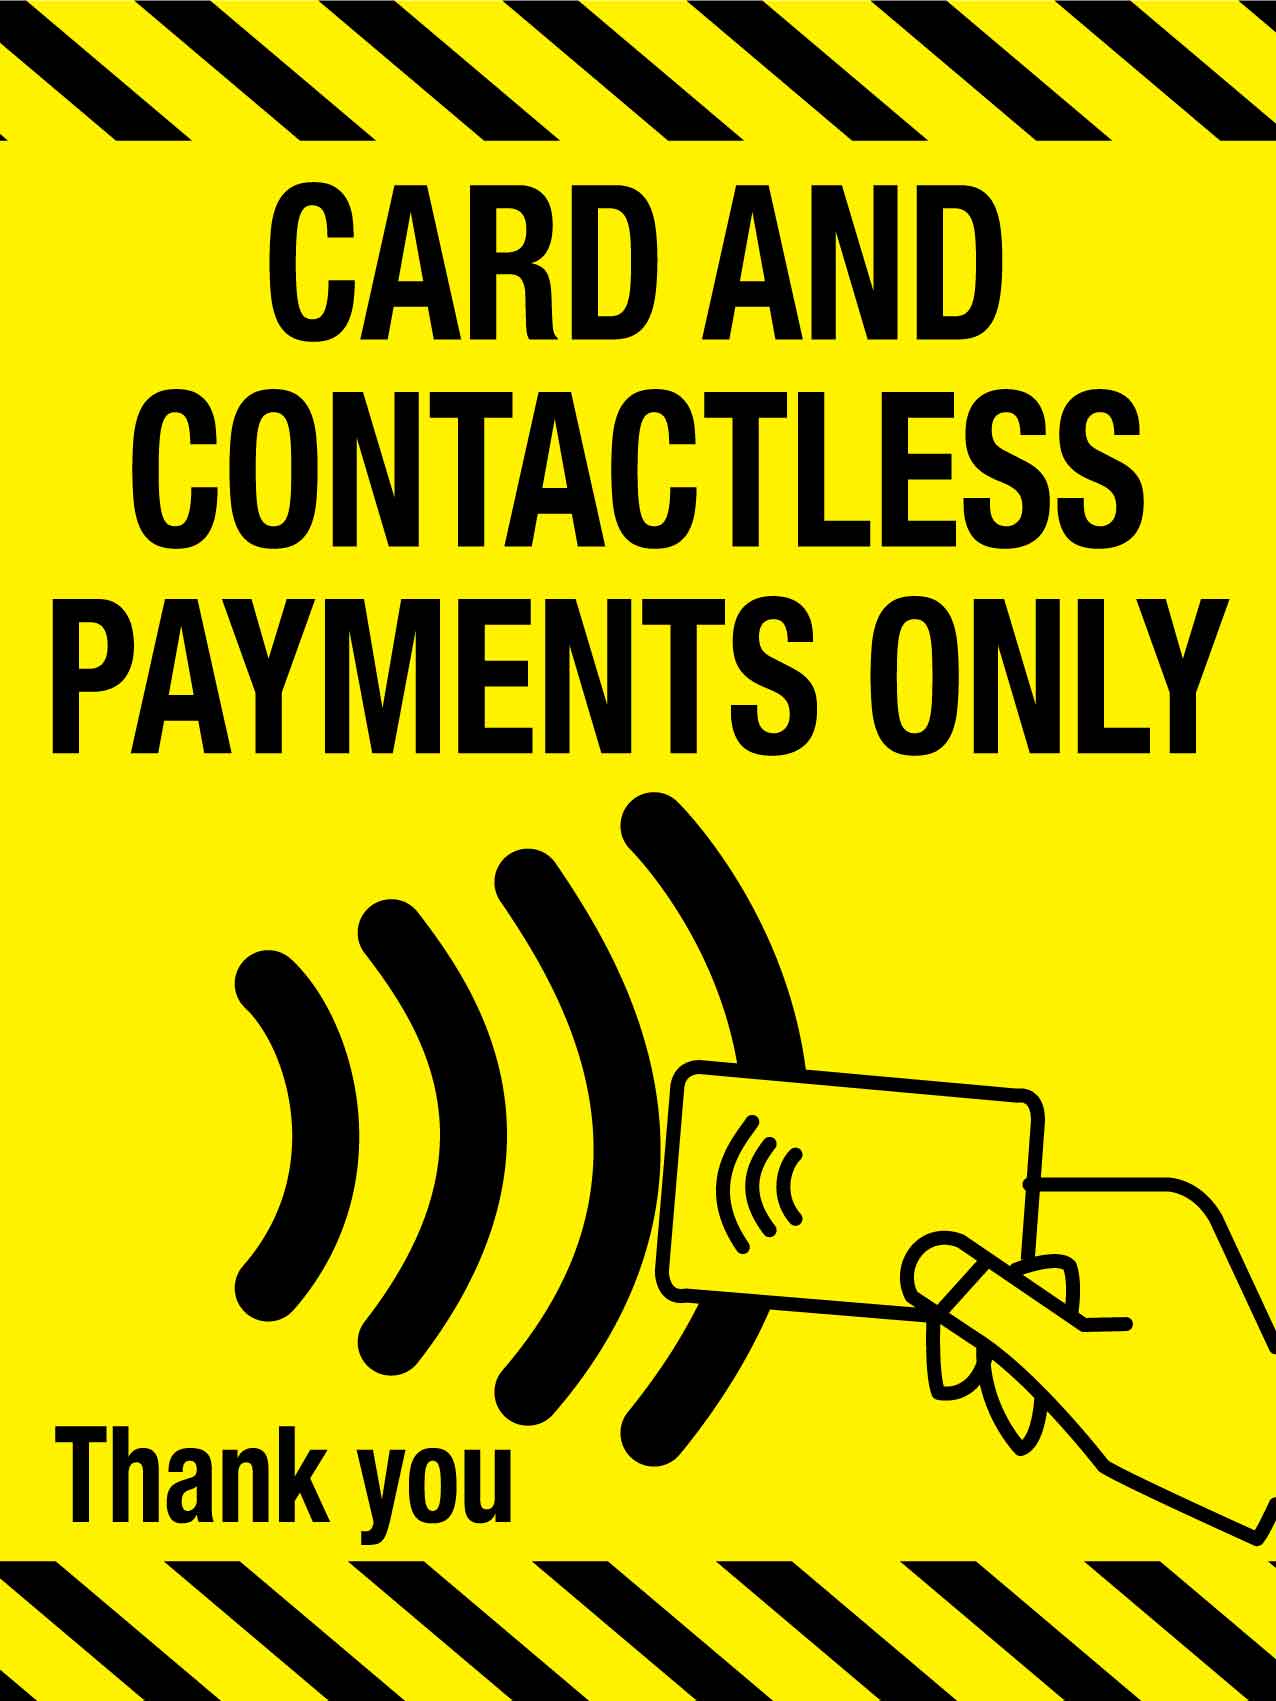 Cards and Contactless Payments Only Sign